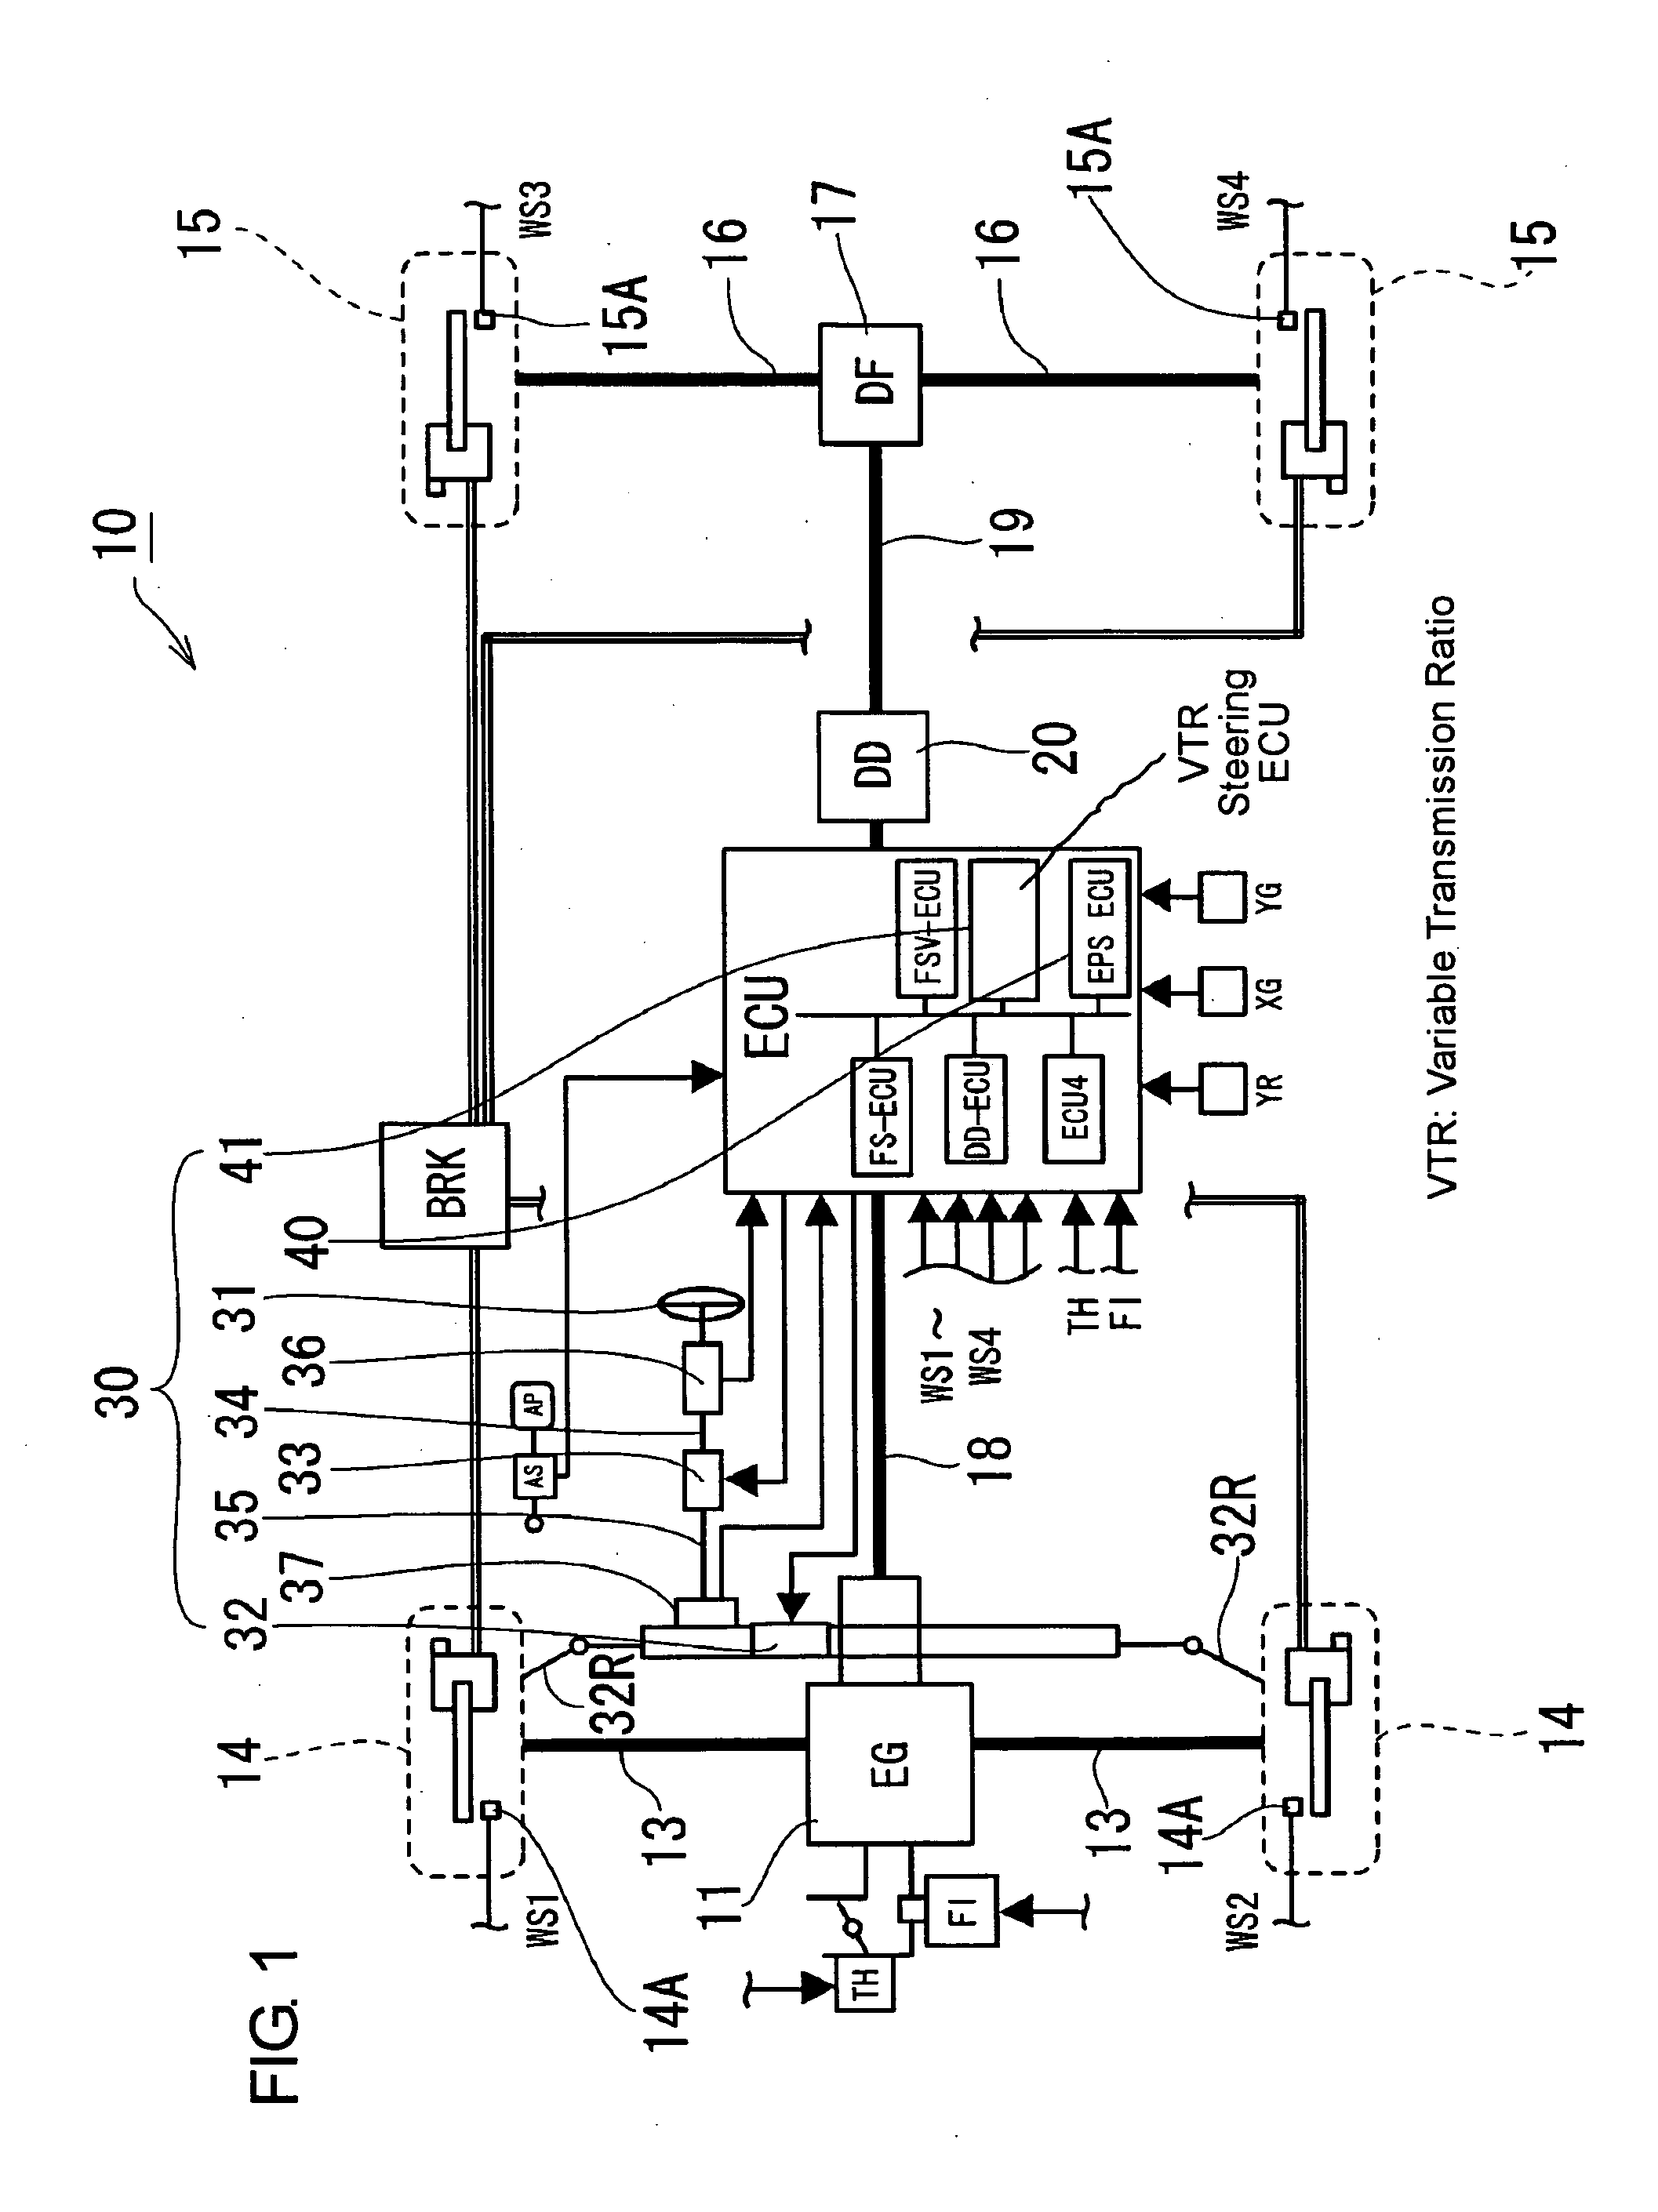 Steering system for vehicle